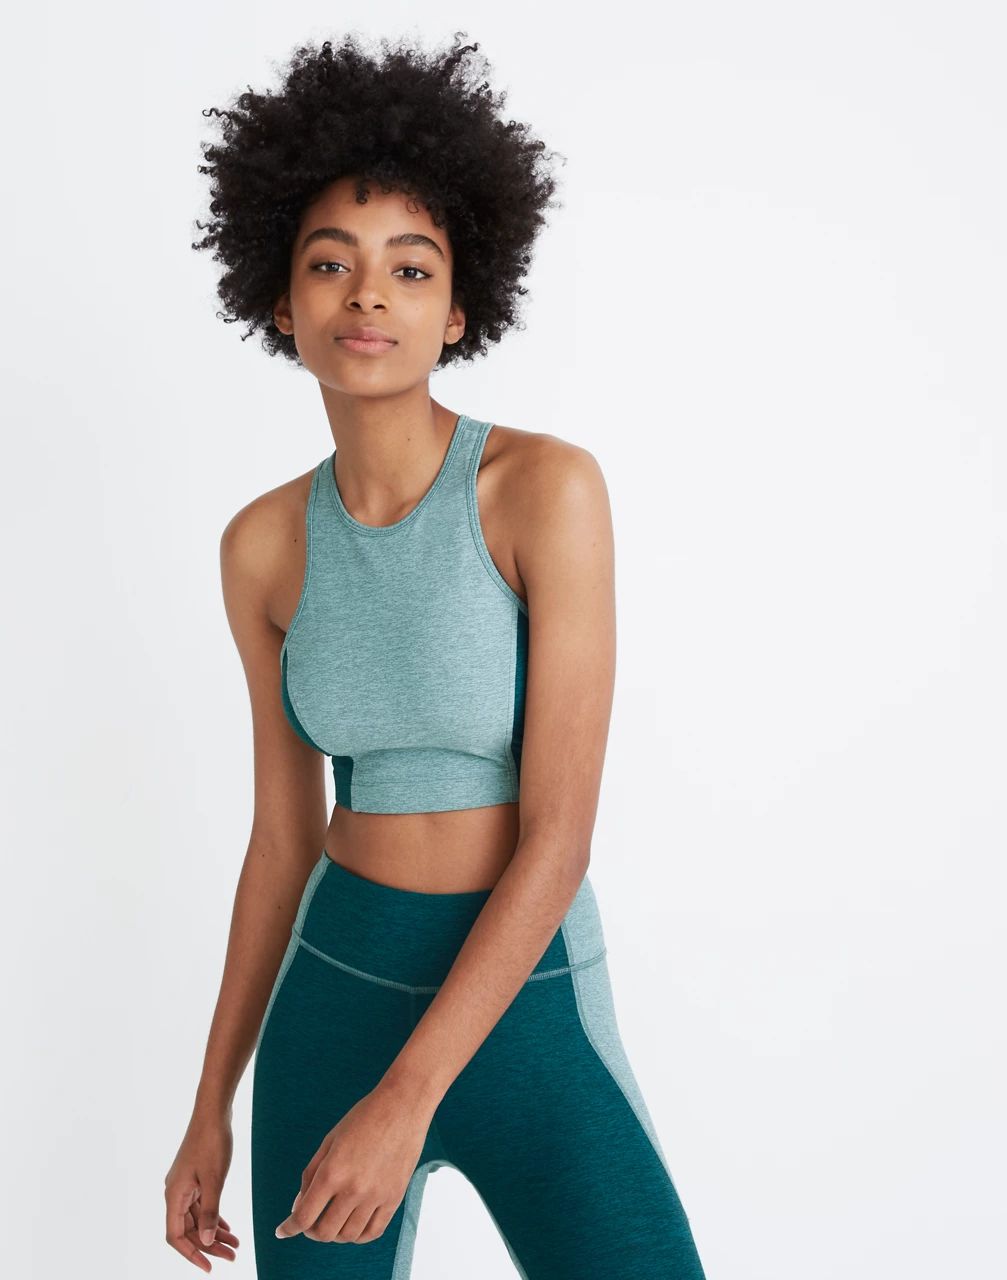 Madewell x Outdoor Voices® Athena Crop Top | Madewell